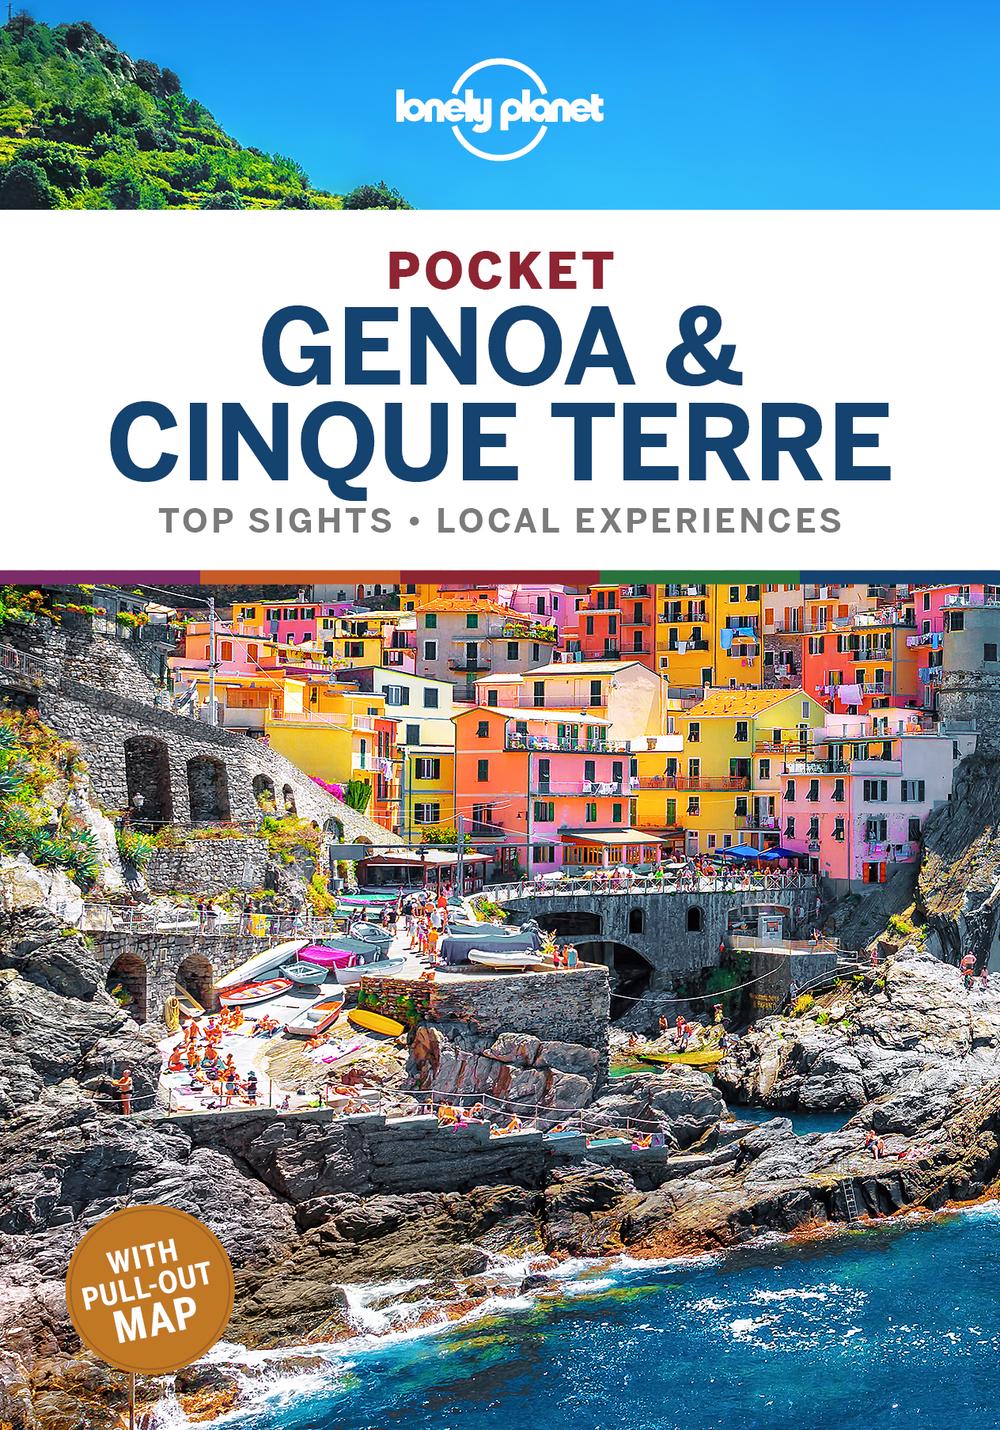 The　9781788683357　by　at　online　Paperback,　Lonely　Terre　Buy　Nile　Lonely　Planet　Cinque　Genoa　Pocket　Planet,